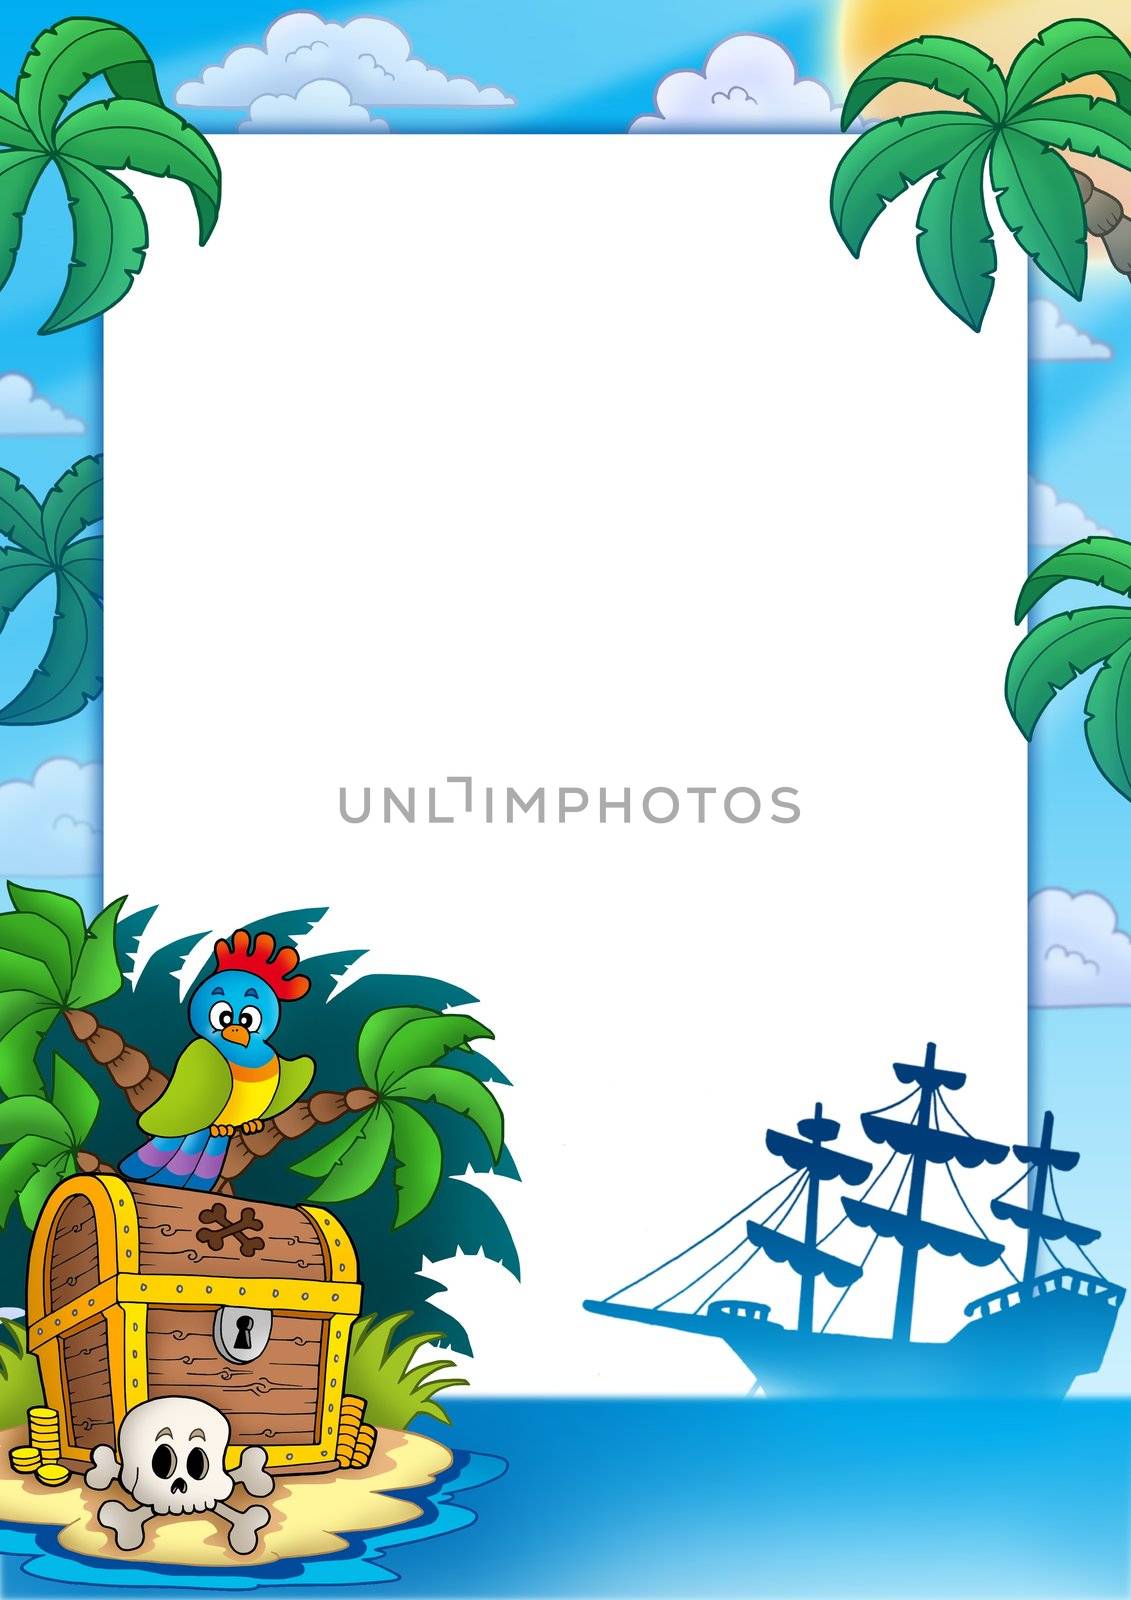 Pirate frame with treasure island - color illustration.